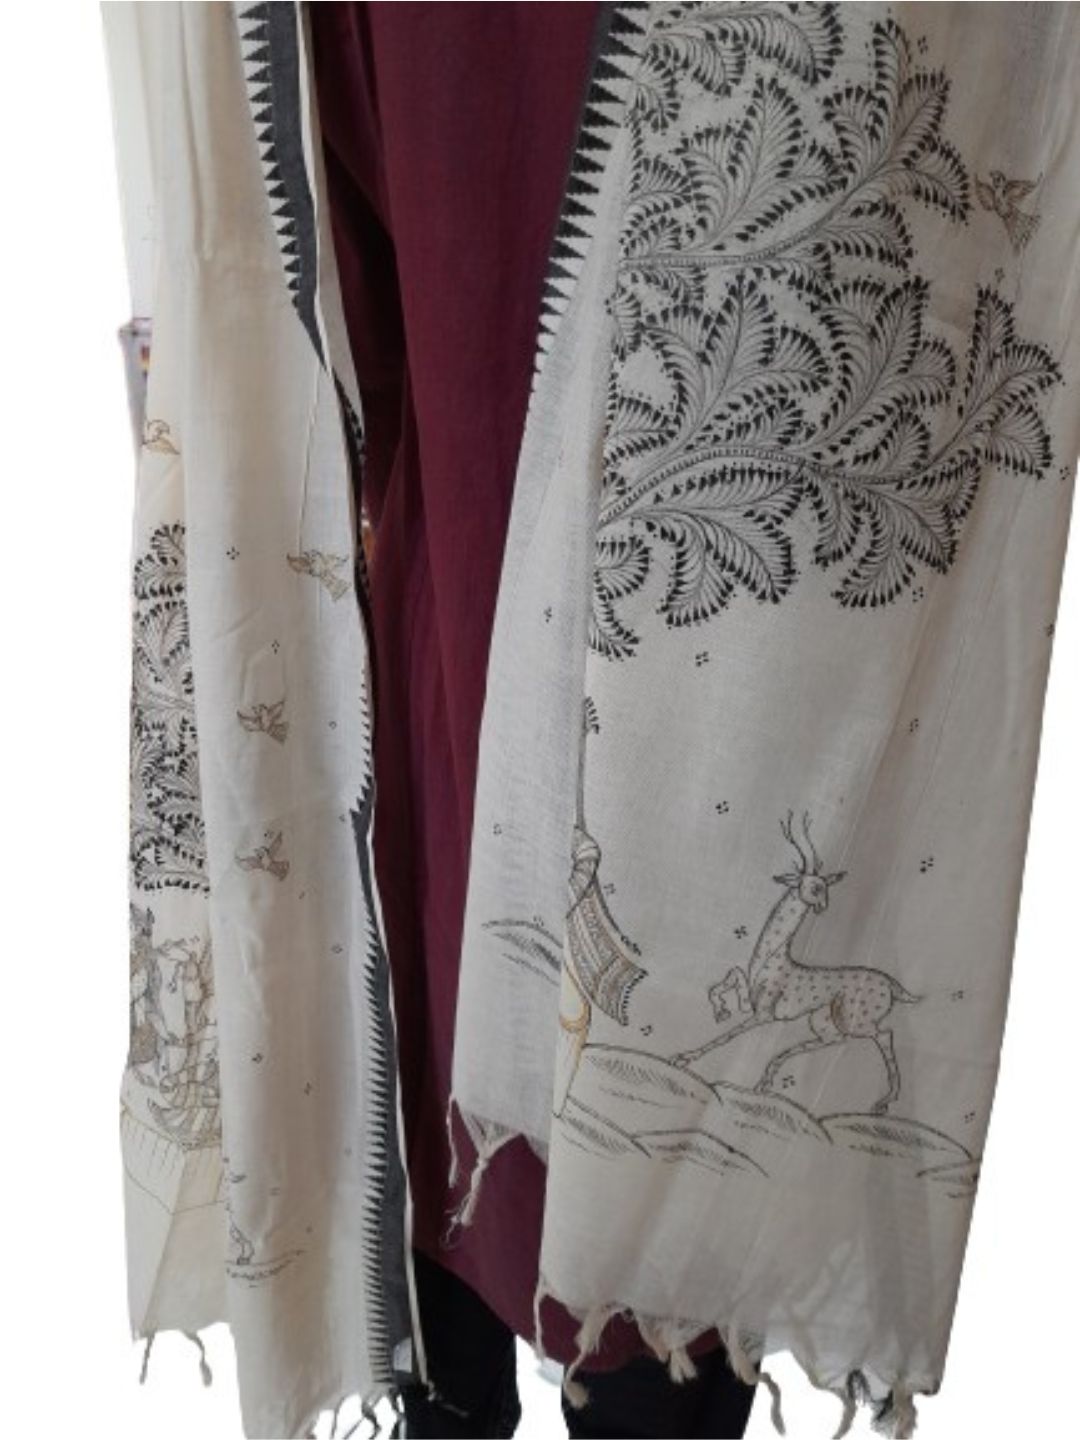 Off-white cotton Dupatta with hand painted Pattachitra motifs